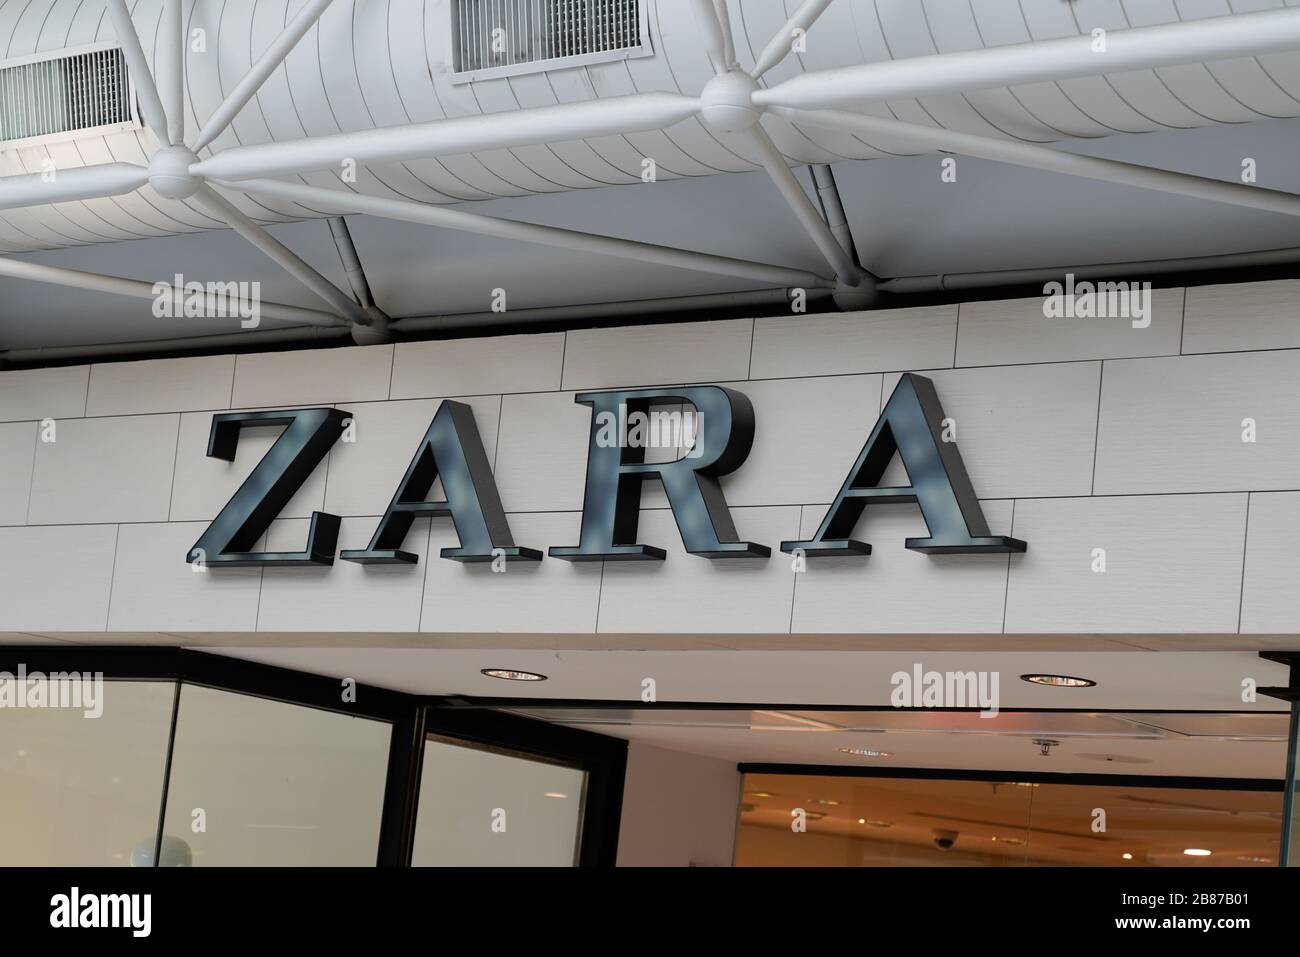 Page 6 - Zara Shop Store High Resolution Stock Photography and Images -  Alamy